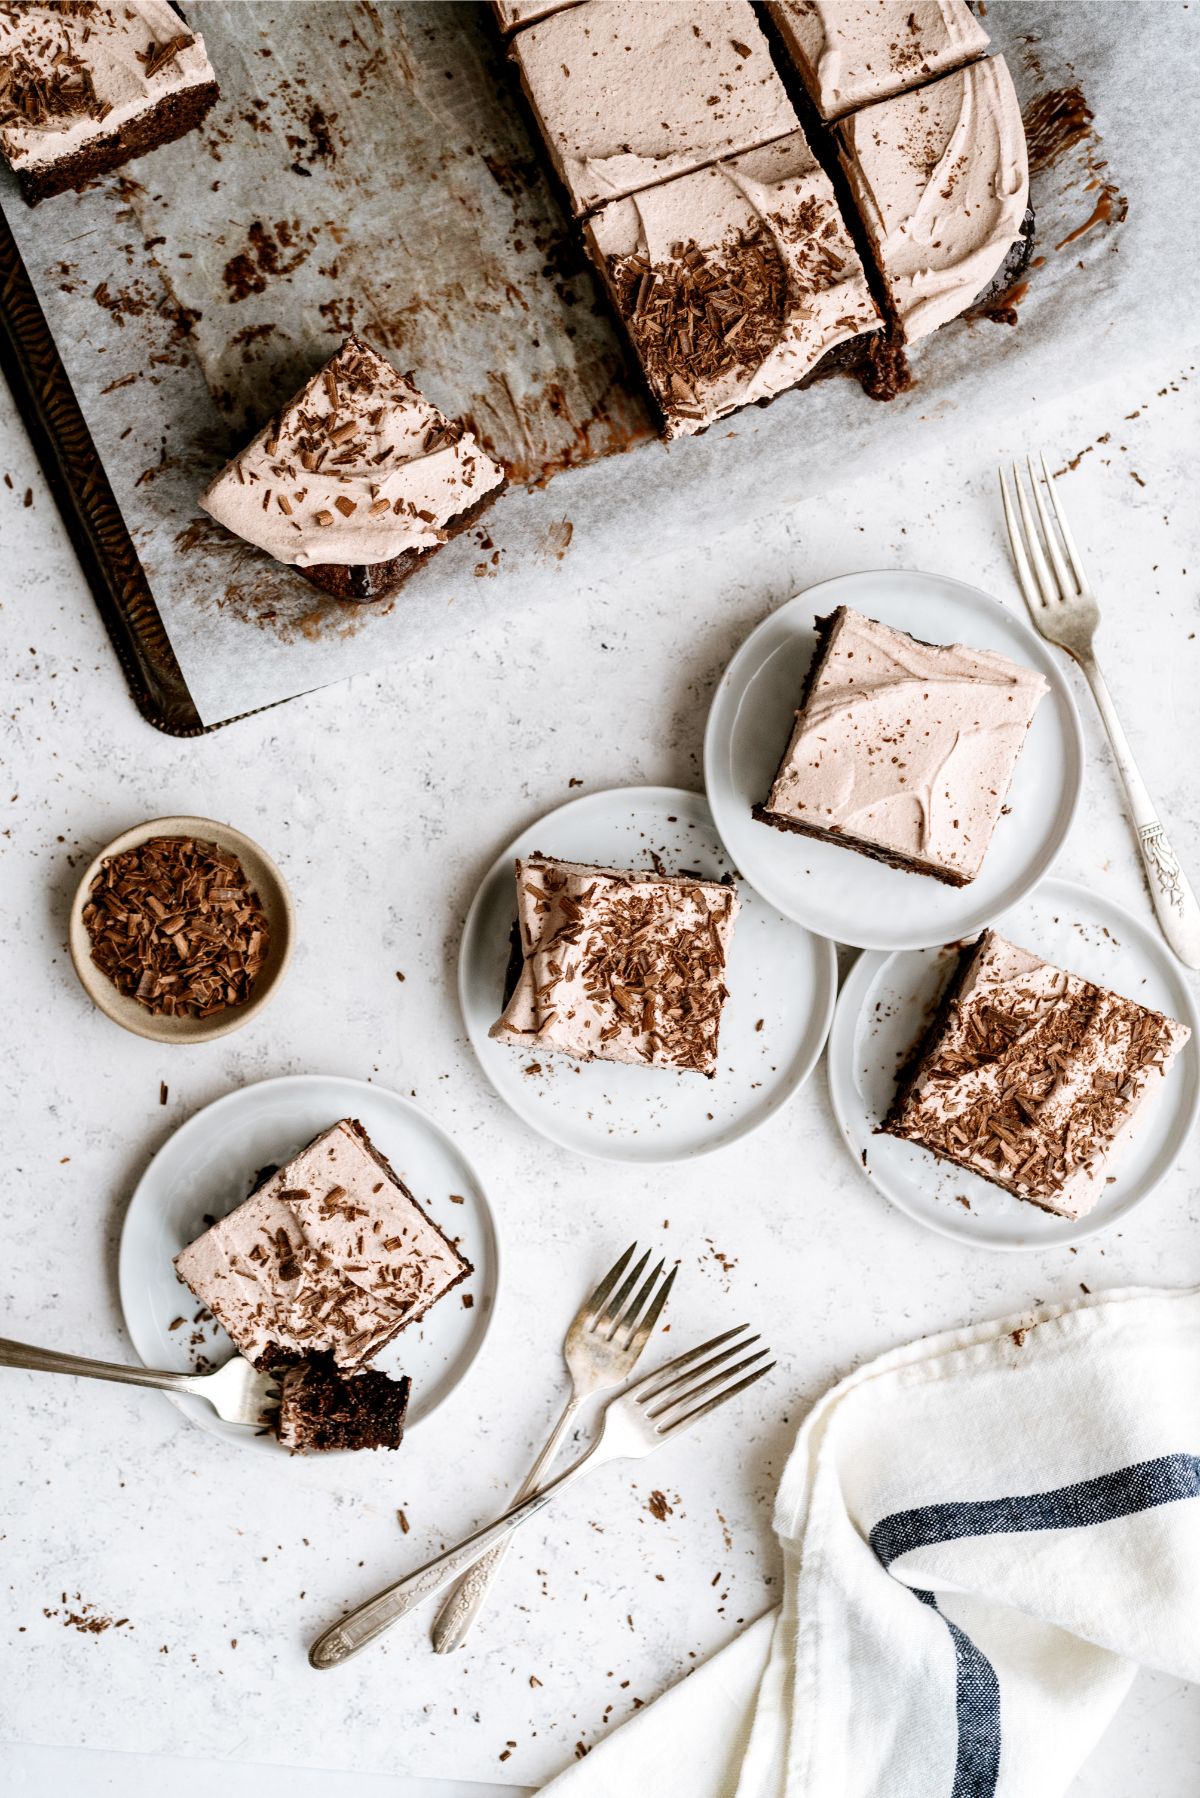 Hot Fudge Chocolate Poke Cake sliced into squares with 4 slices on plates